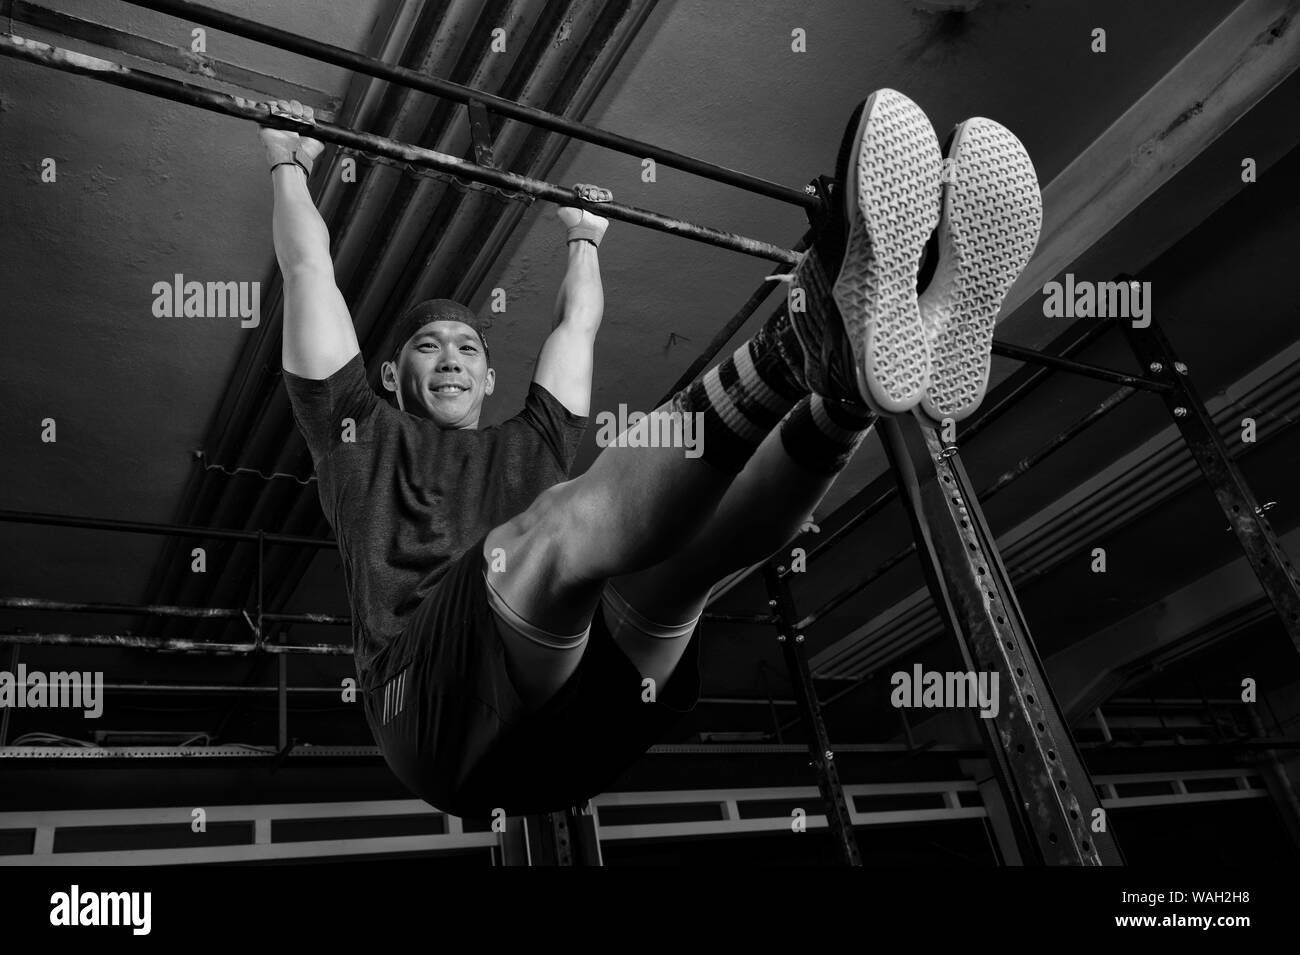 An attractive young man with muscles is smiling and doing the exercise l sit on the horizontal bar. Functional fitness workout in a gym. Stock Photo